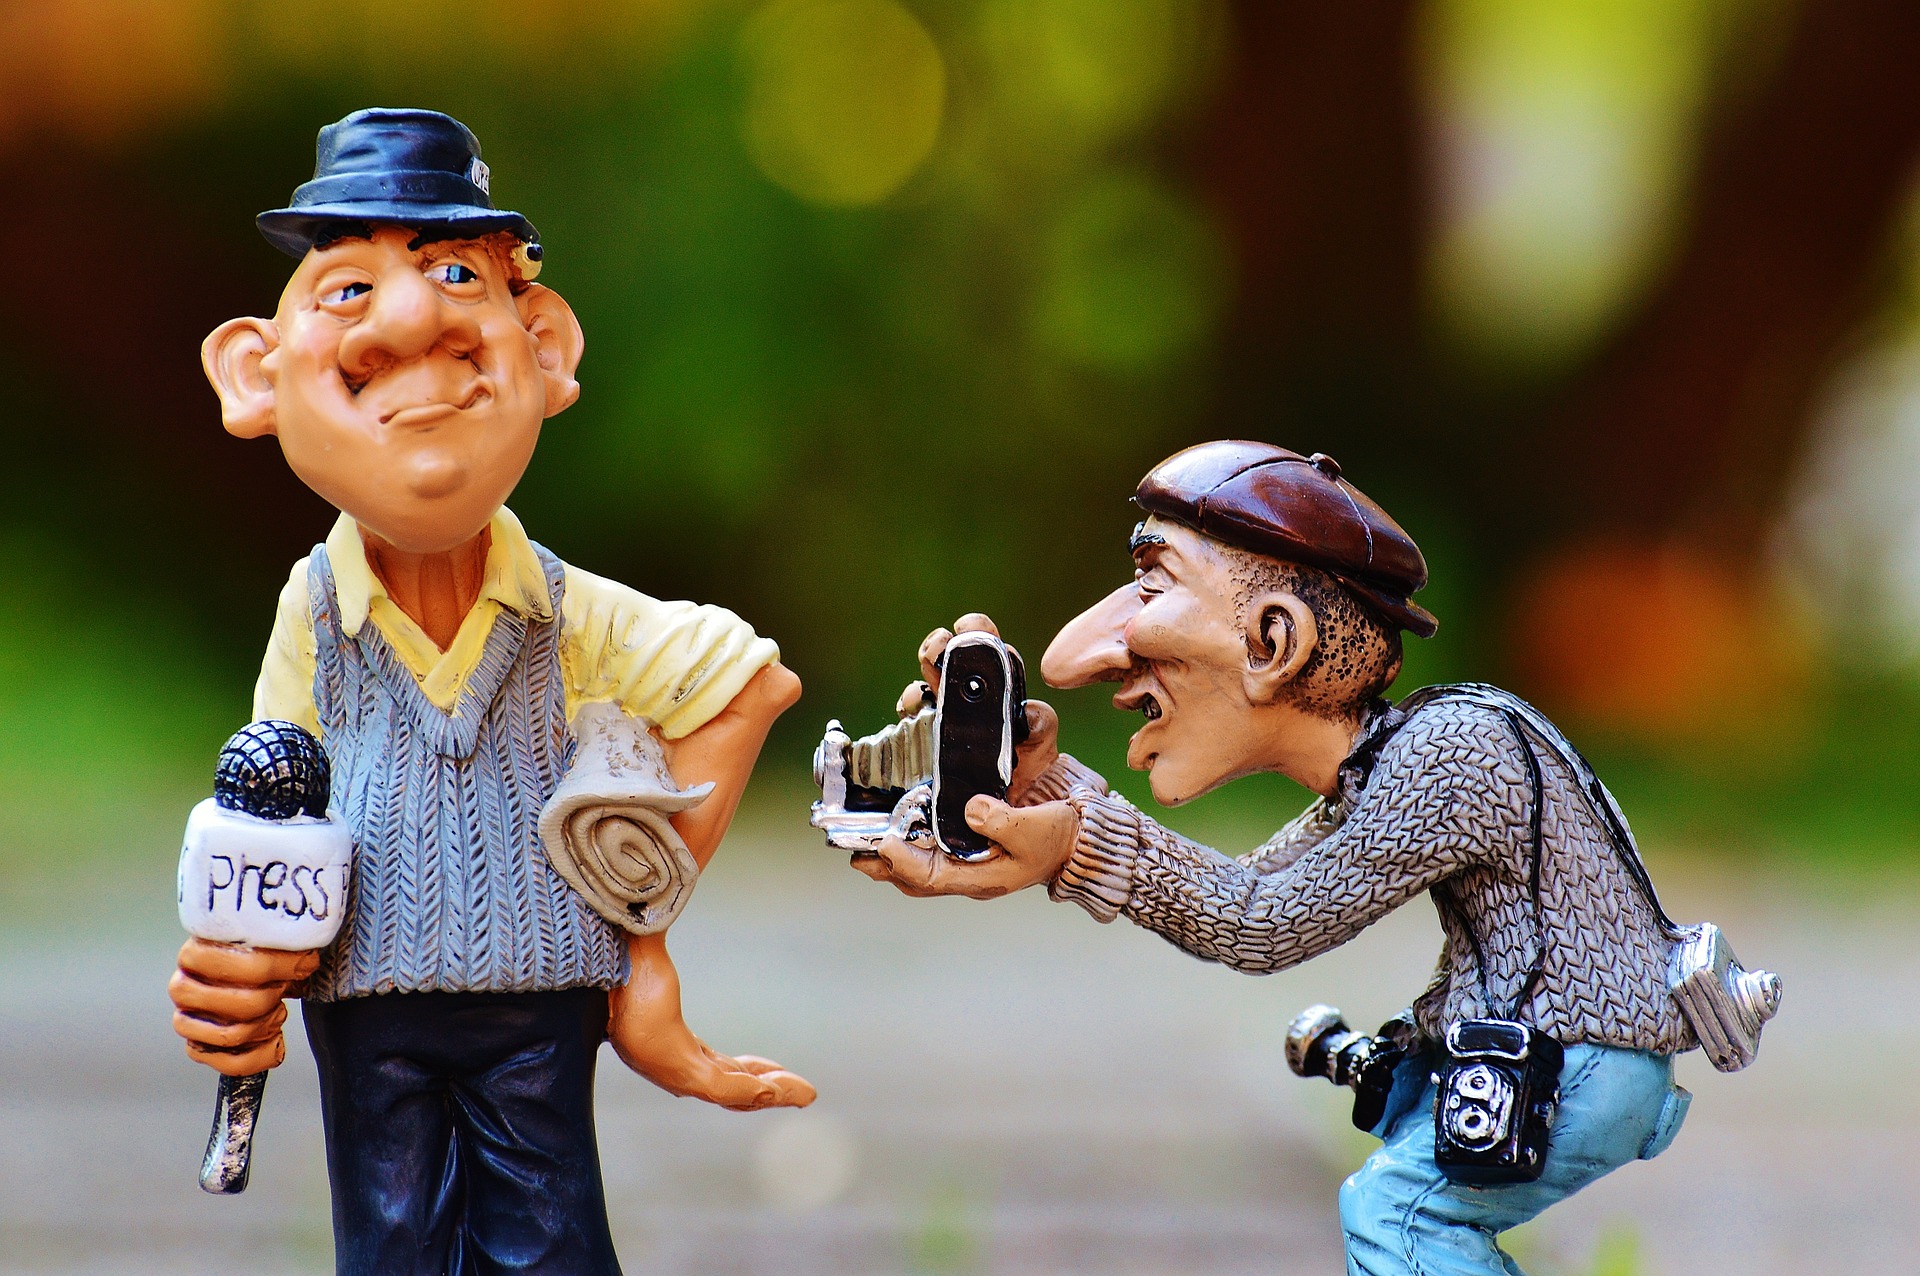 Press And Journalist Figurines by Alexas_Fotos